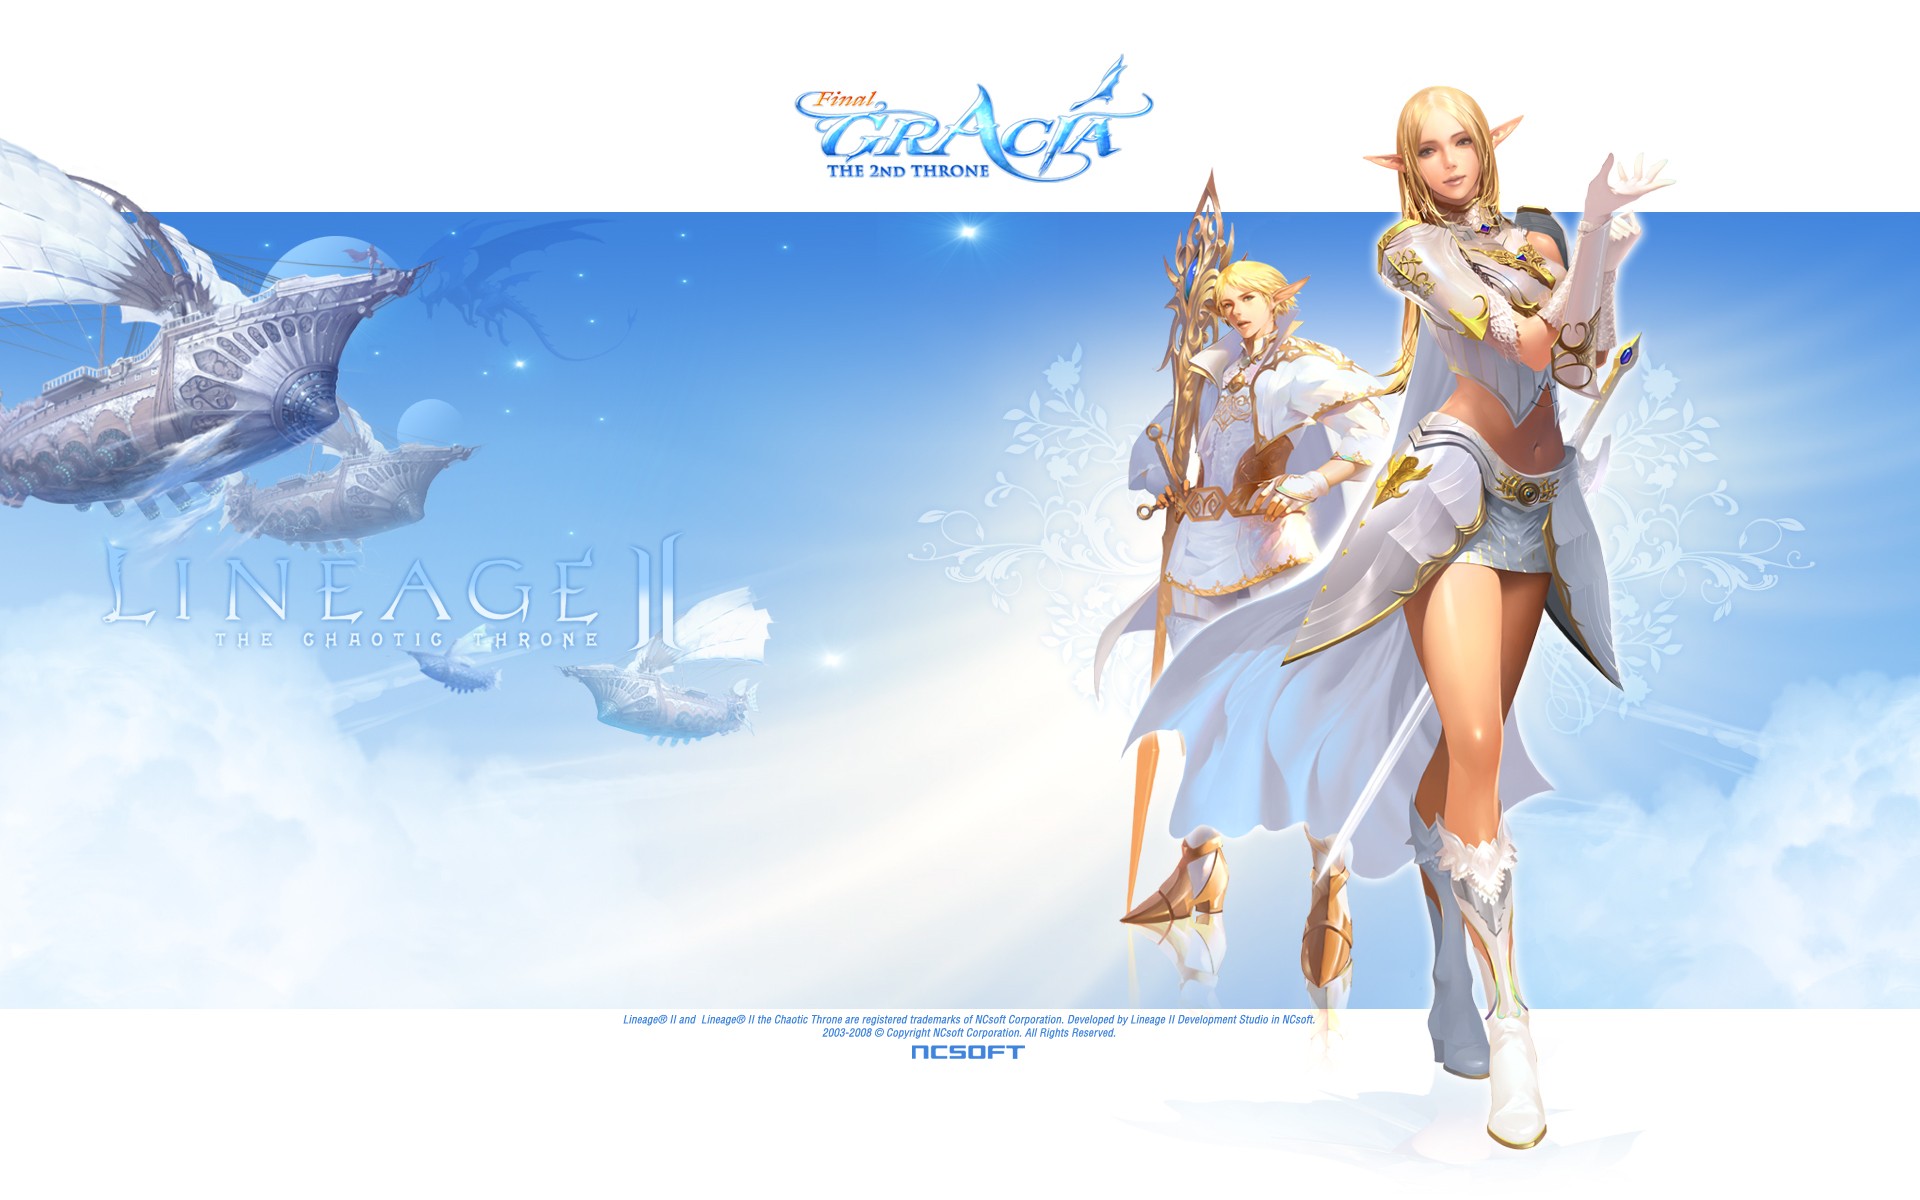 mage, Lineage, Elves, Lineage Wallpaper